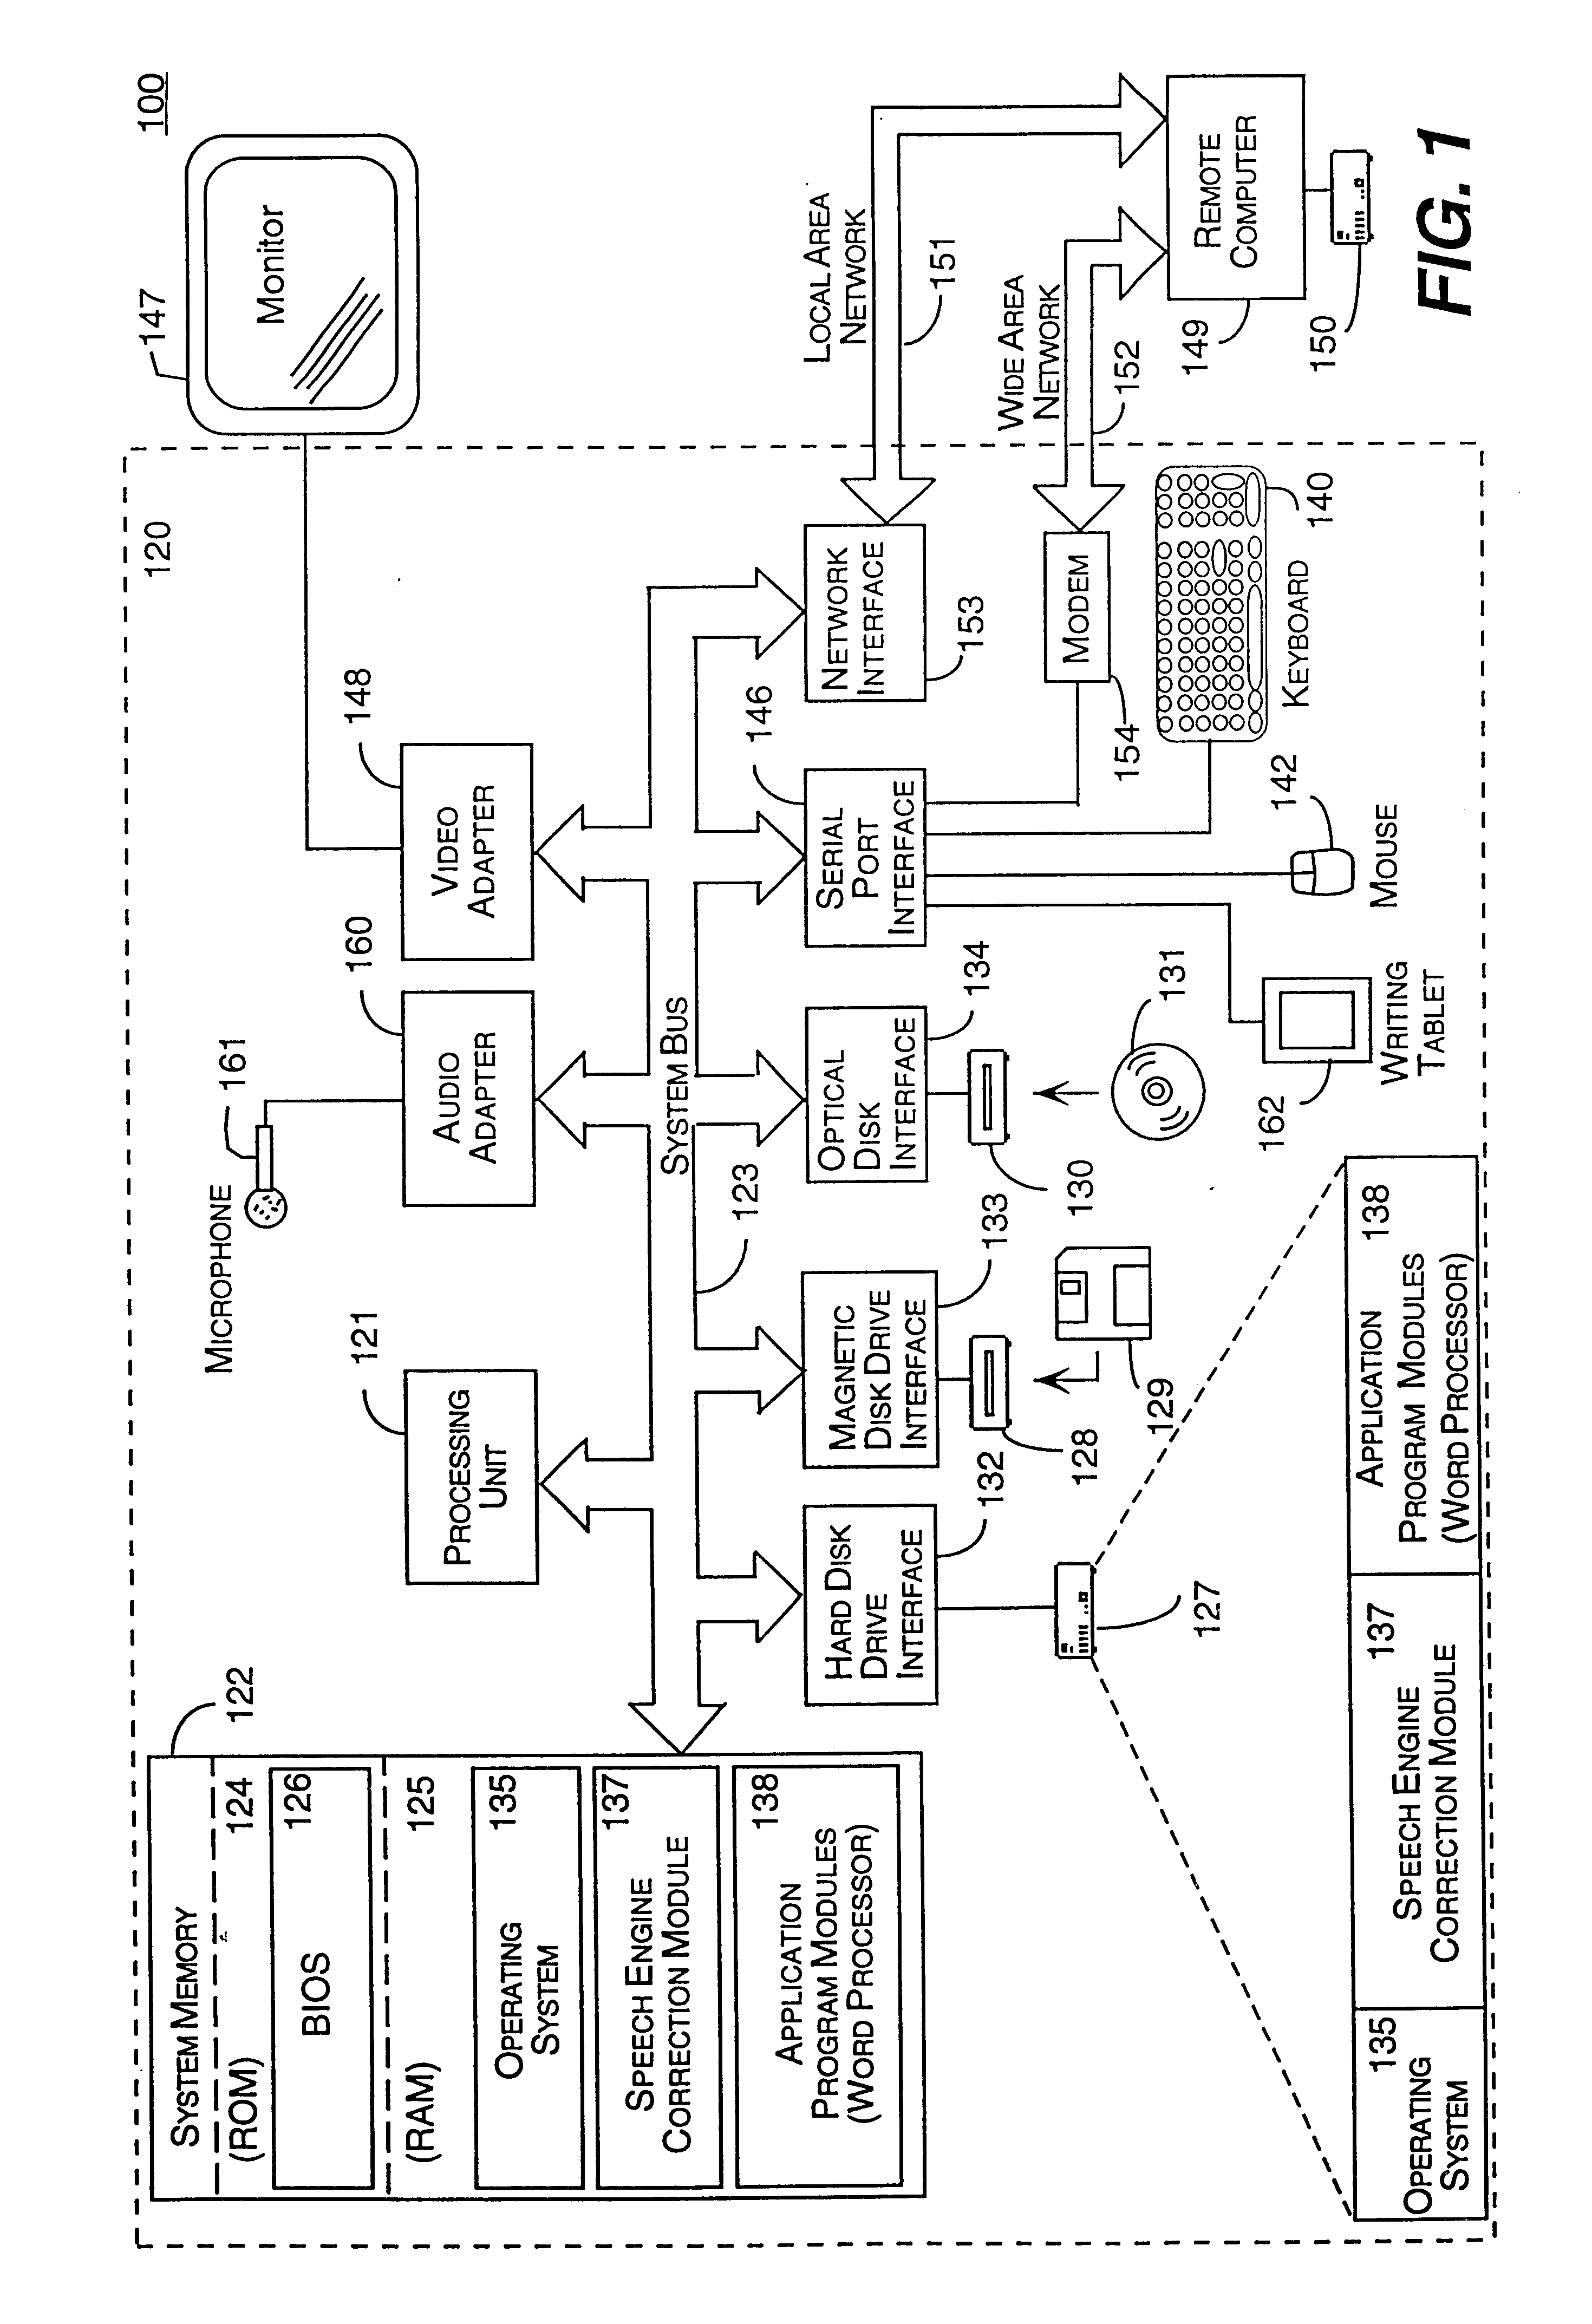 System and method for correction of speech recognition mode errors